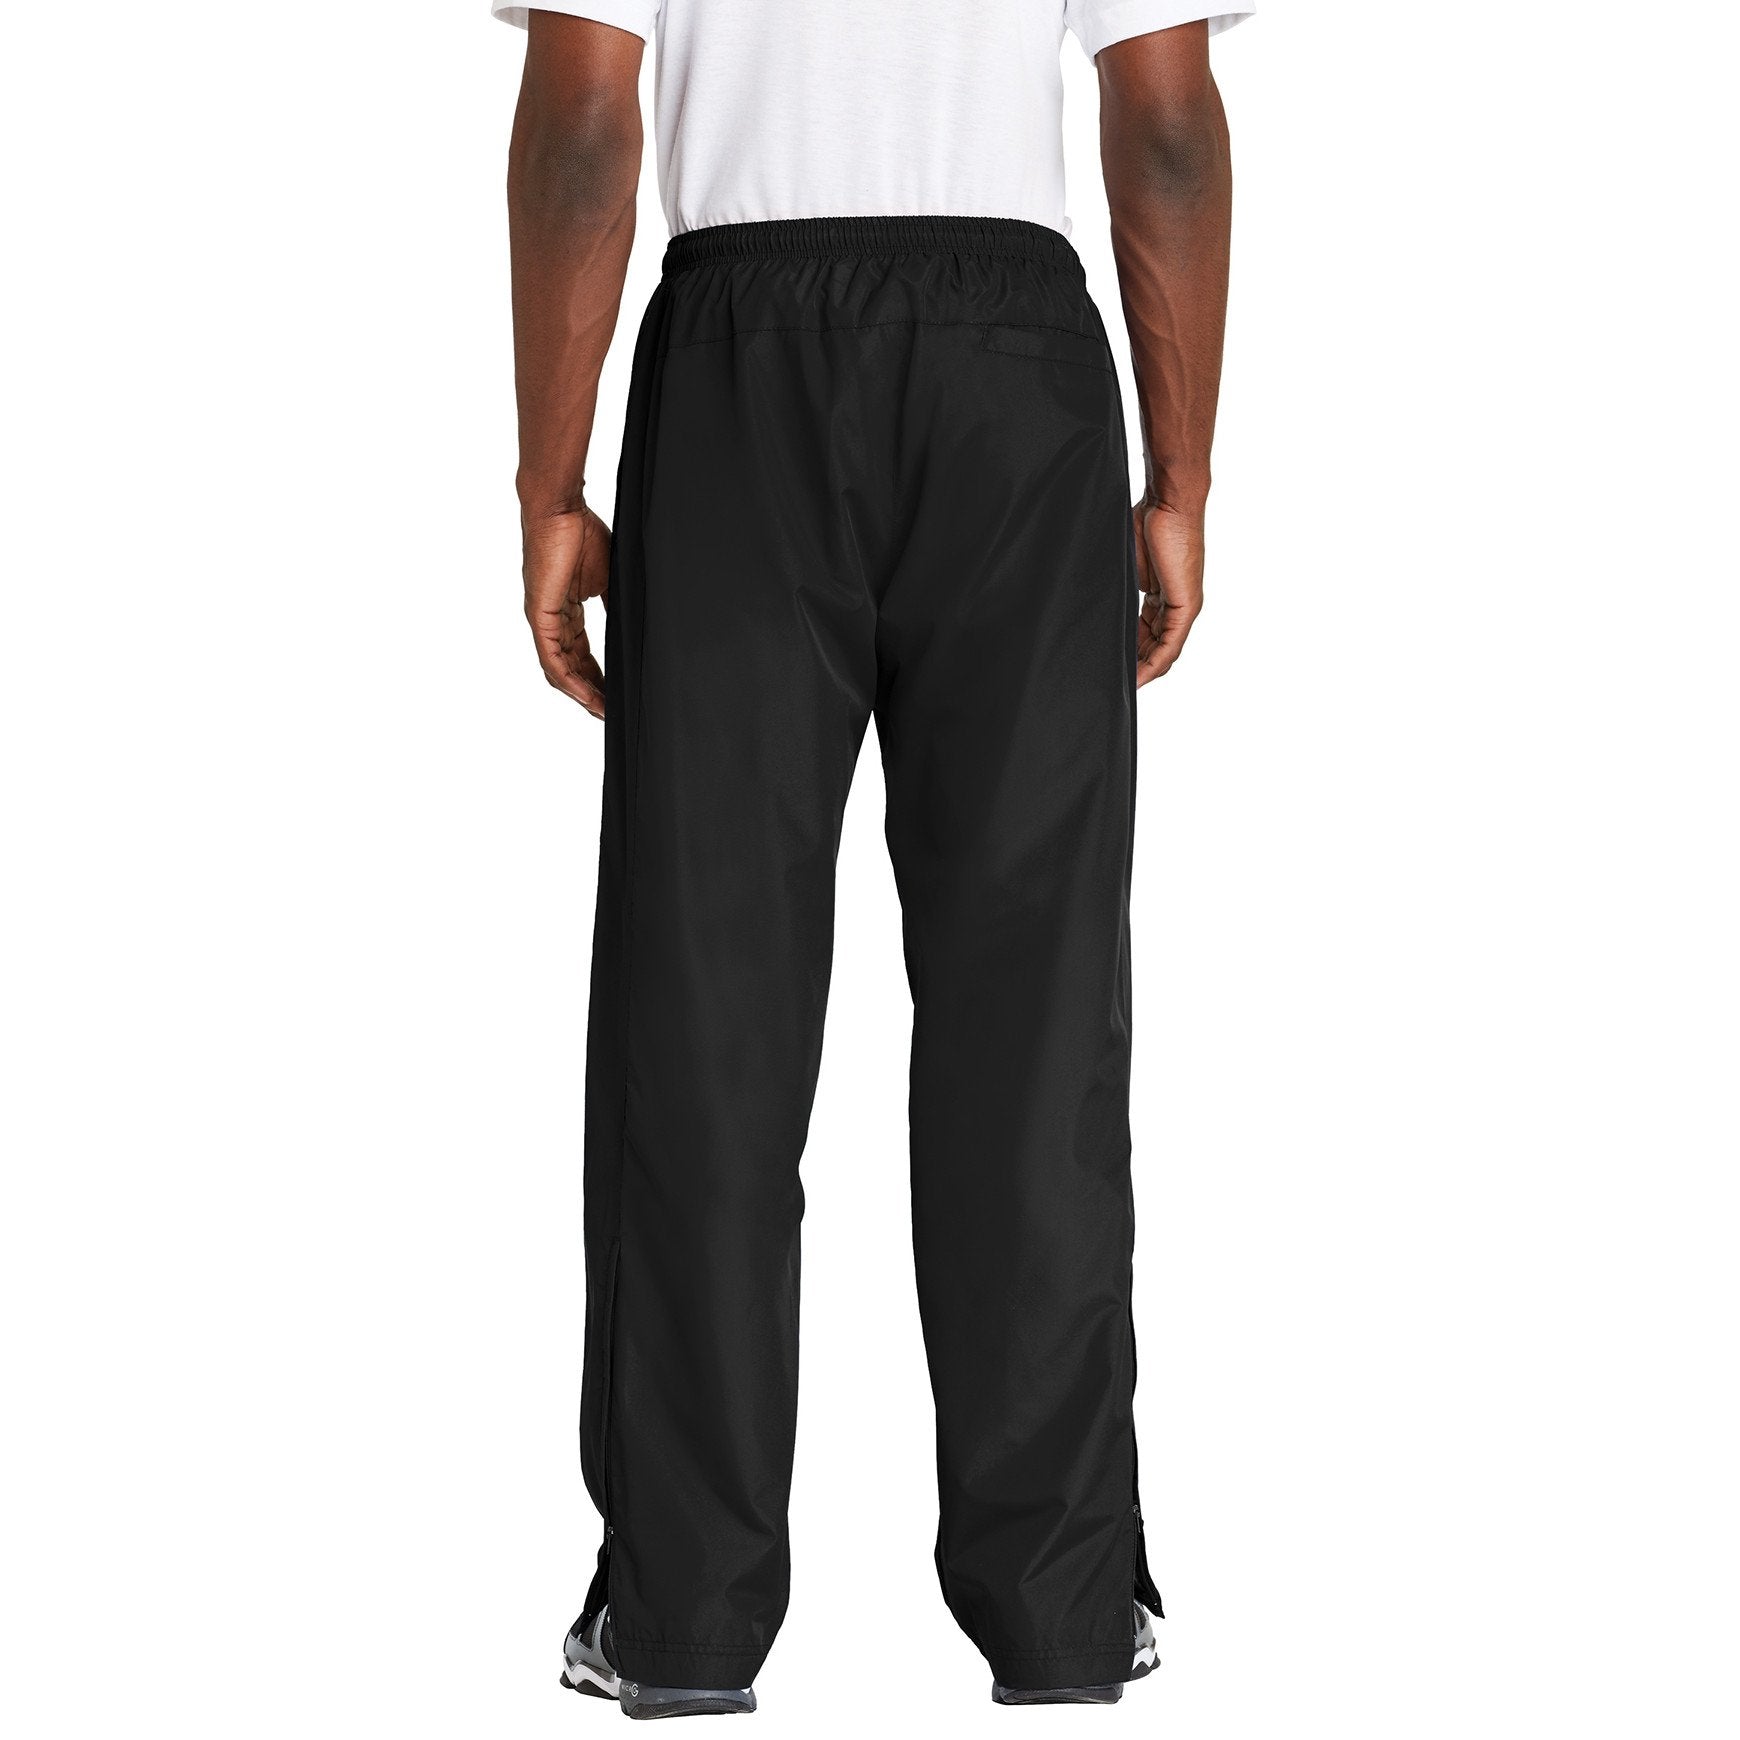 adidas Authentic Wind Pant  Track pants mens, Adidas pants outfit, Mens  running pants